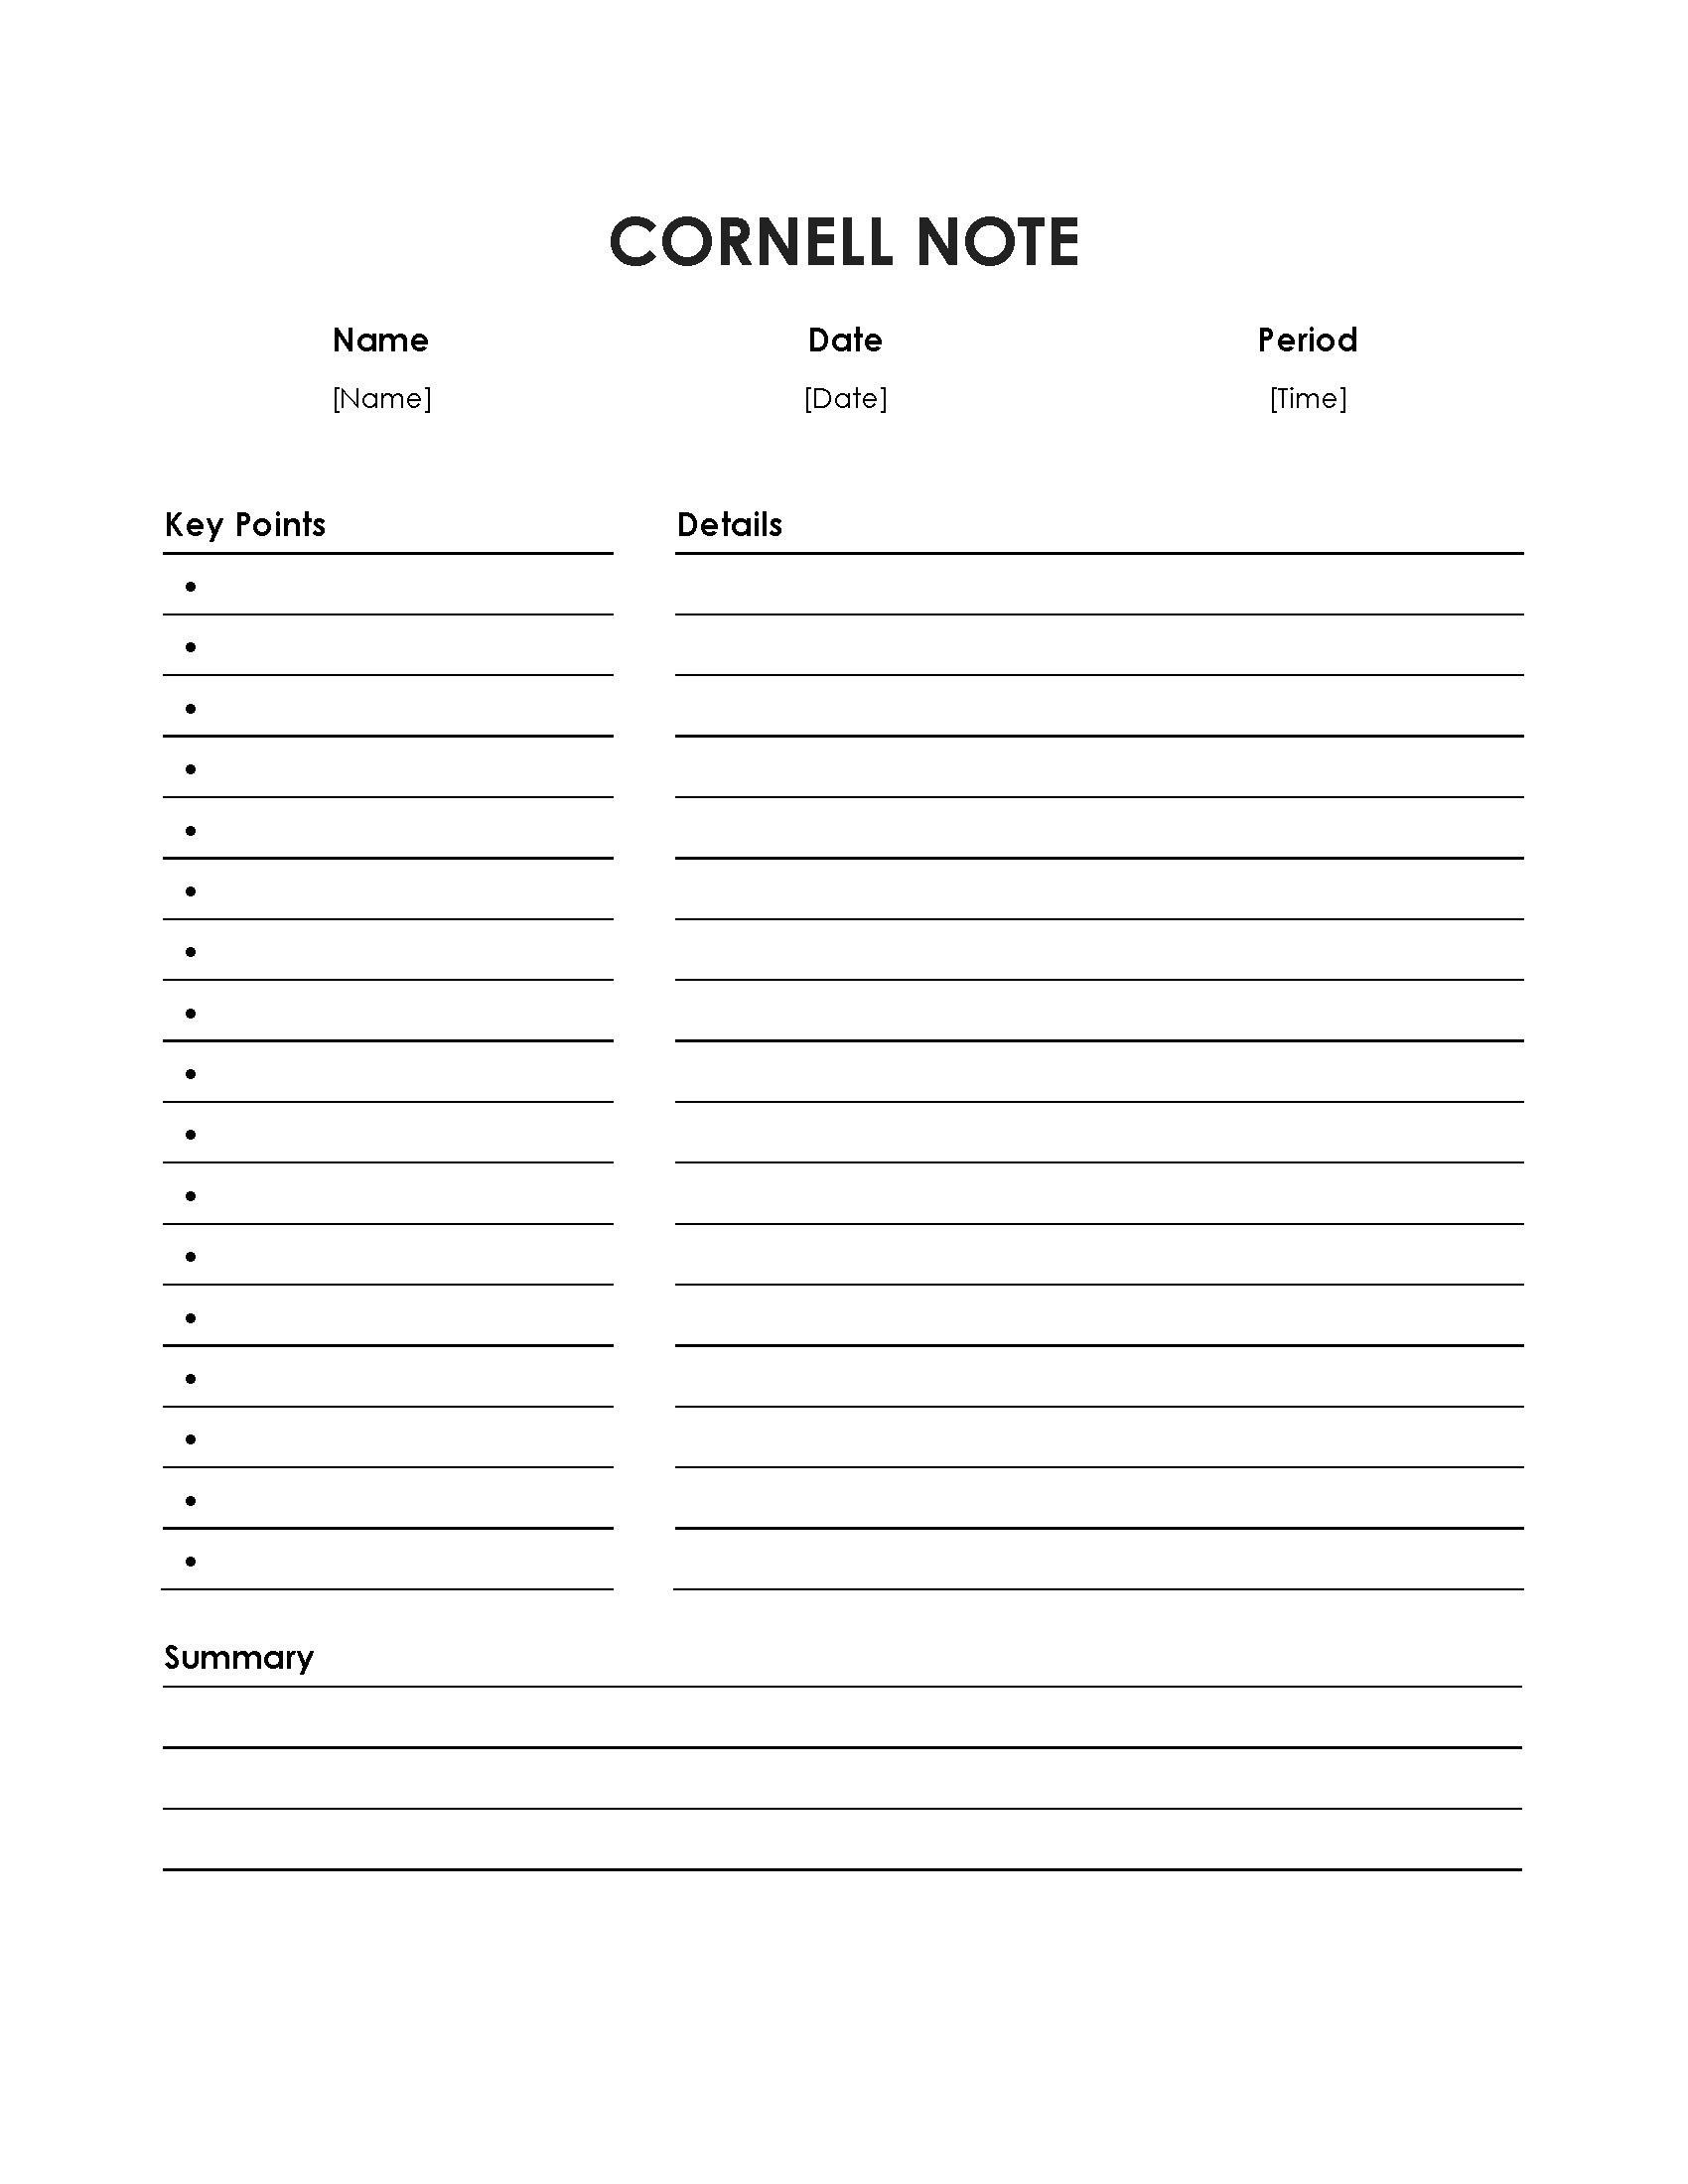 40 Free Cornell Note Templates (with Cornell Note Taking Explained)